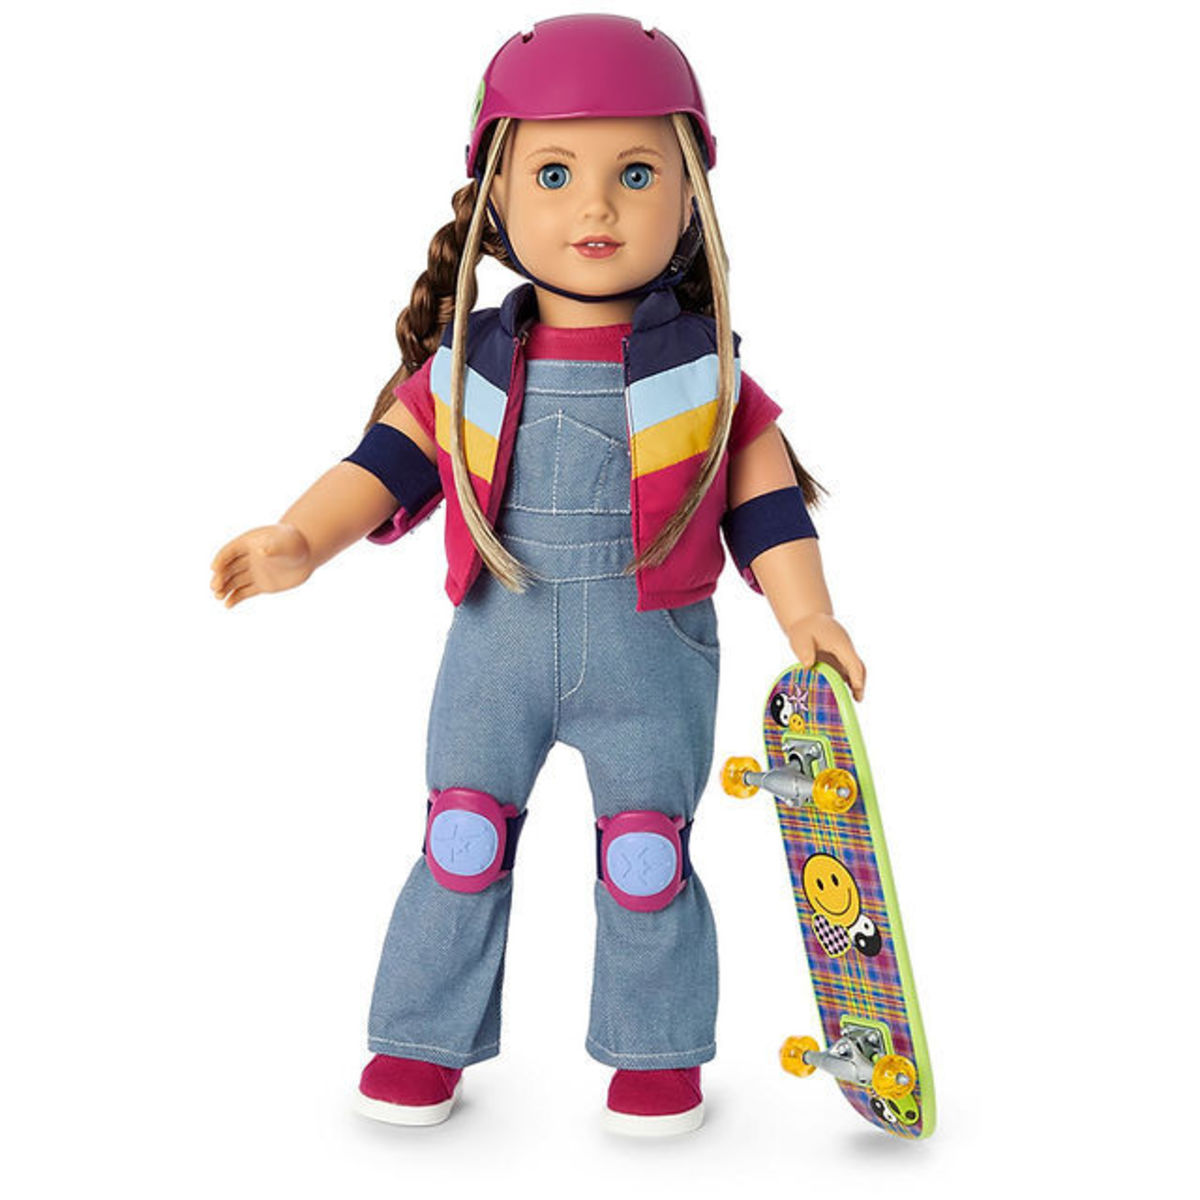 All About Isabel And Nicki Hoffman The New 1990s Historical American Girl Dolls 